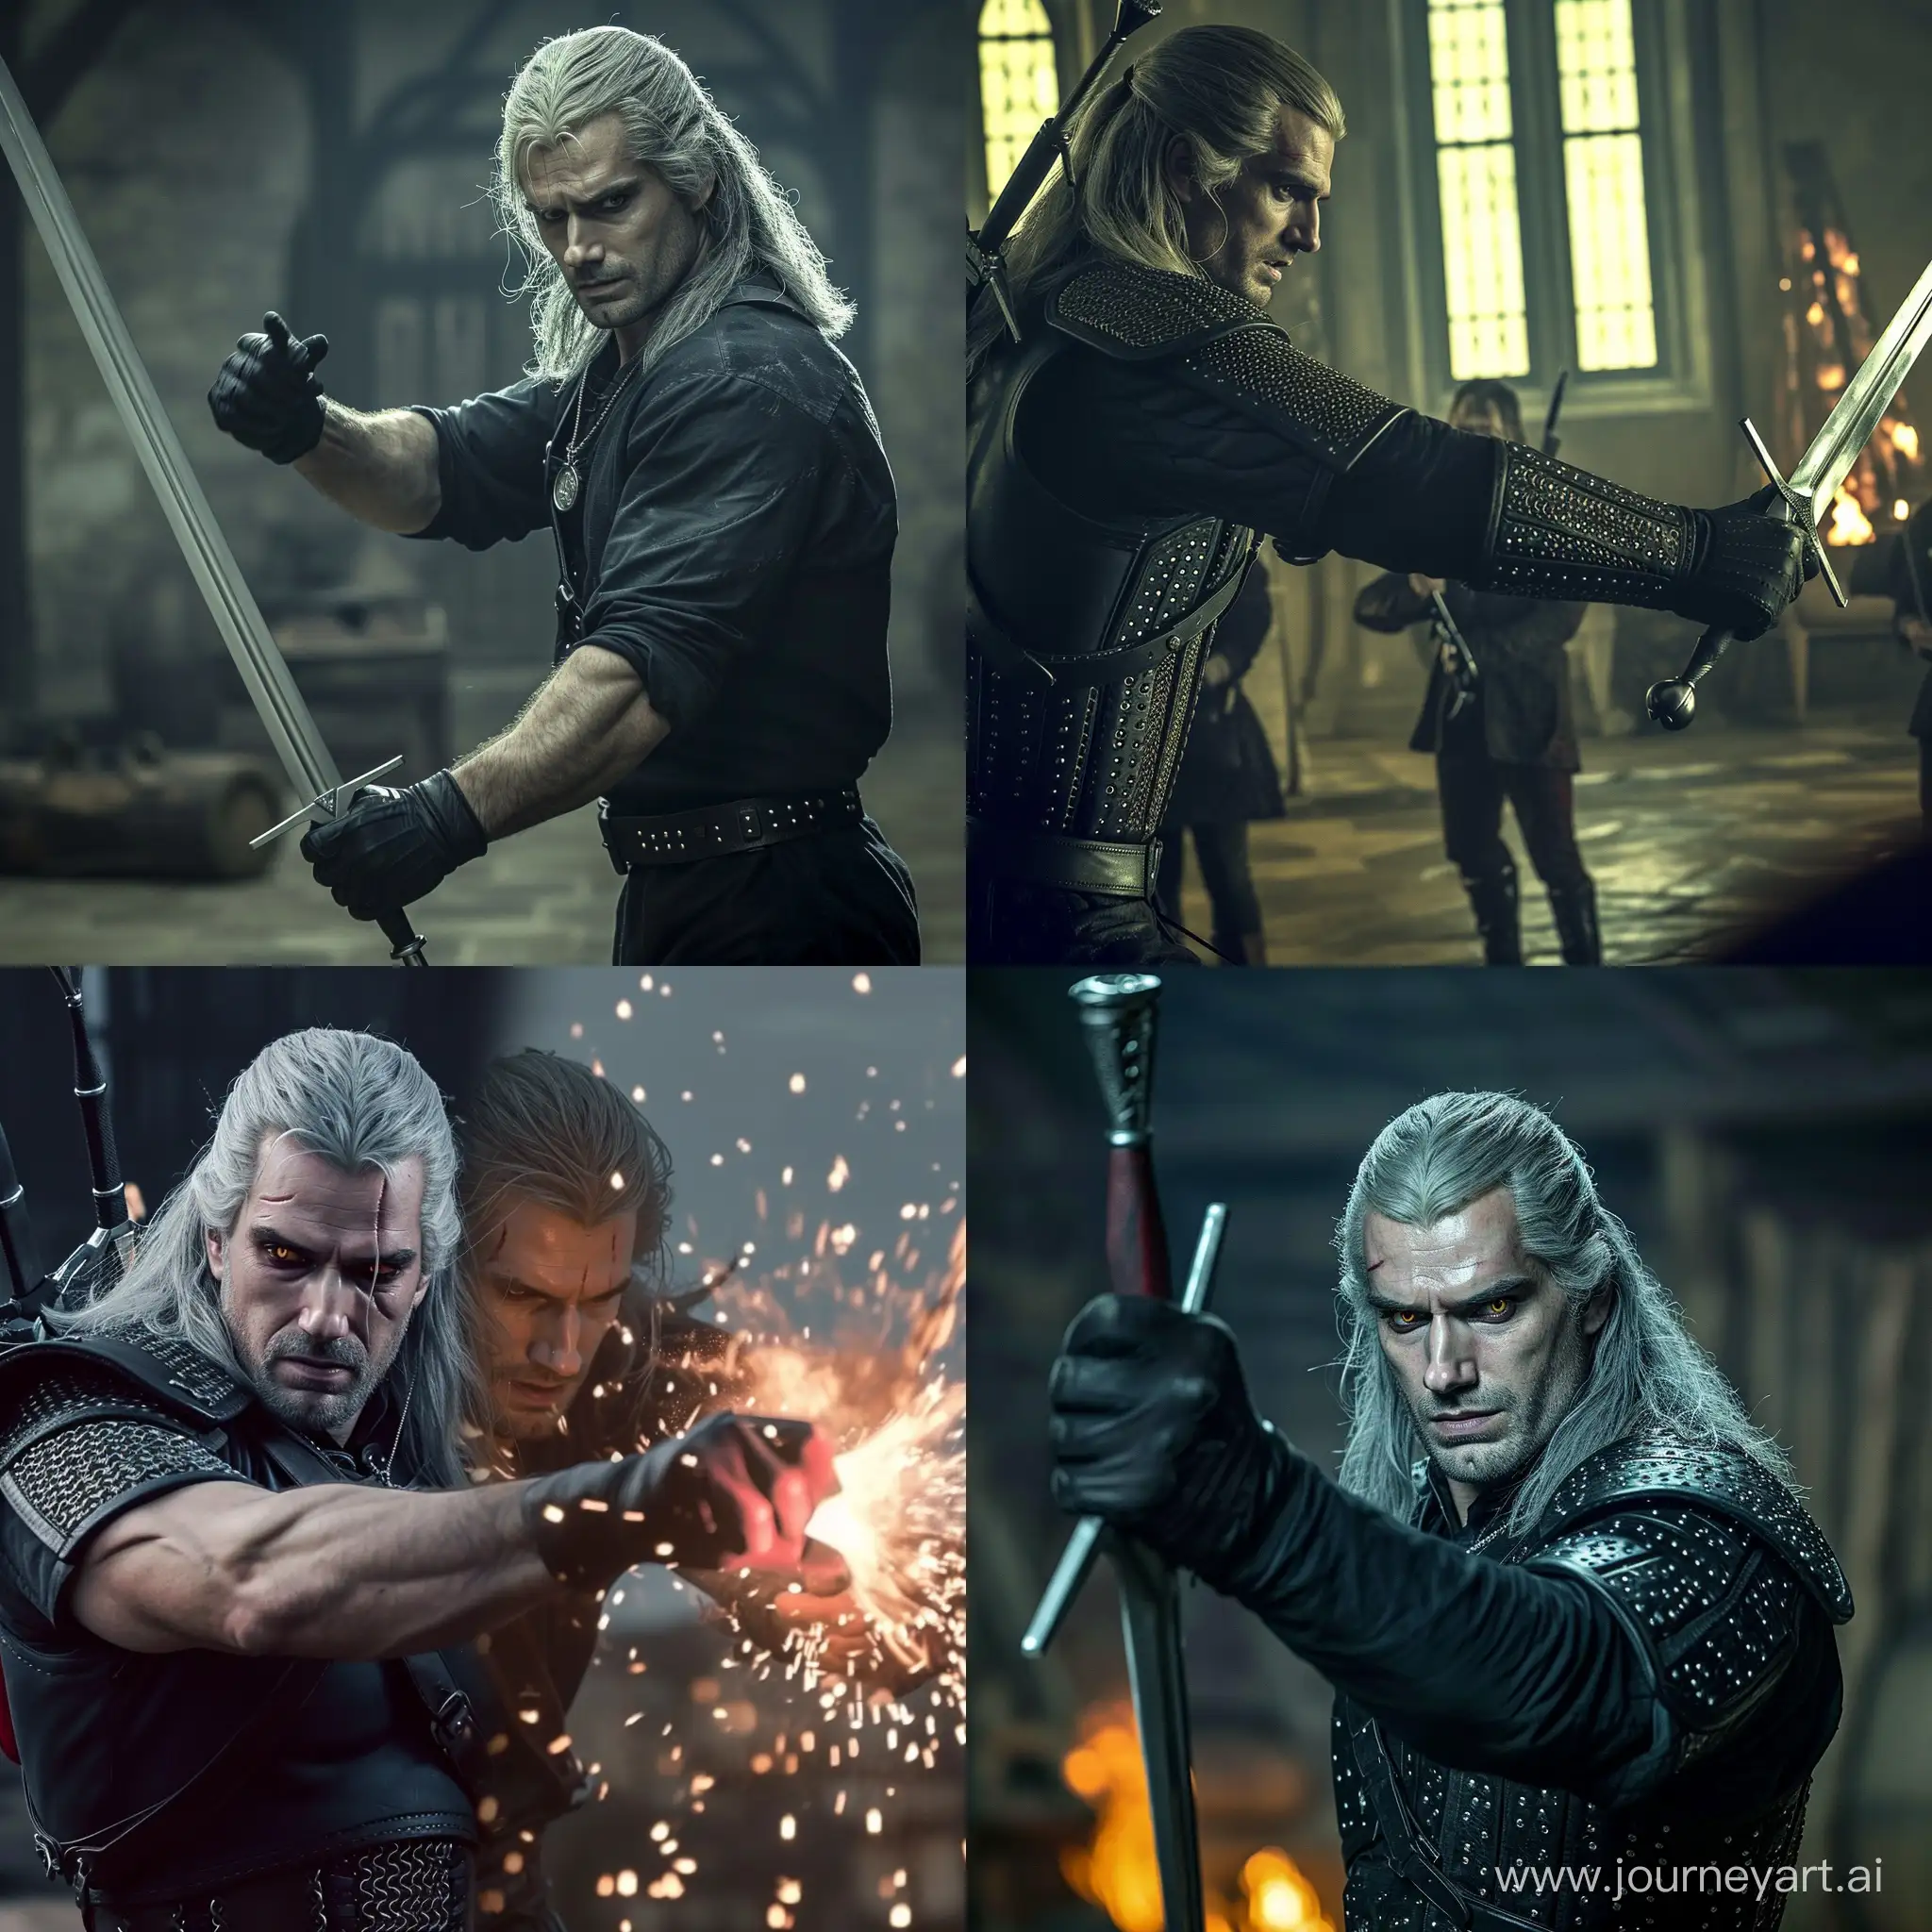 Epic-Battle-Geralt-Confrontation-in-the-Witcher-Universe